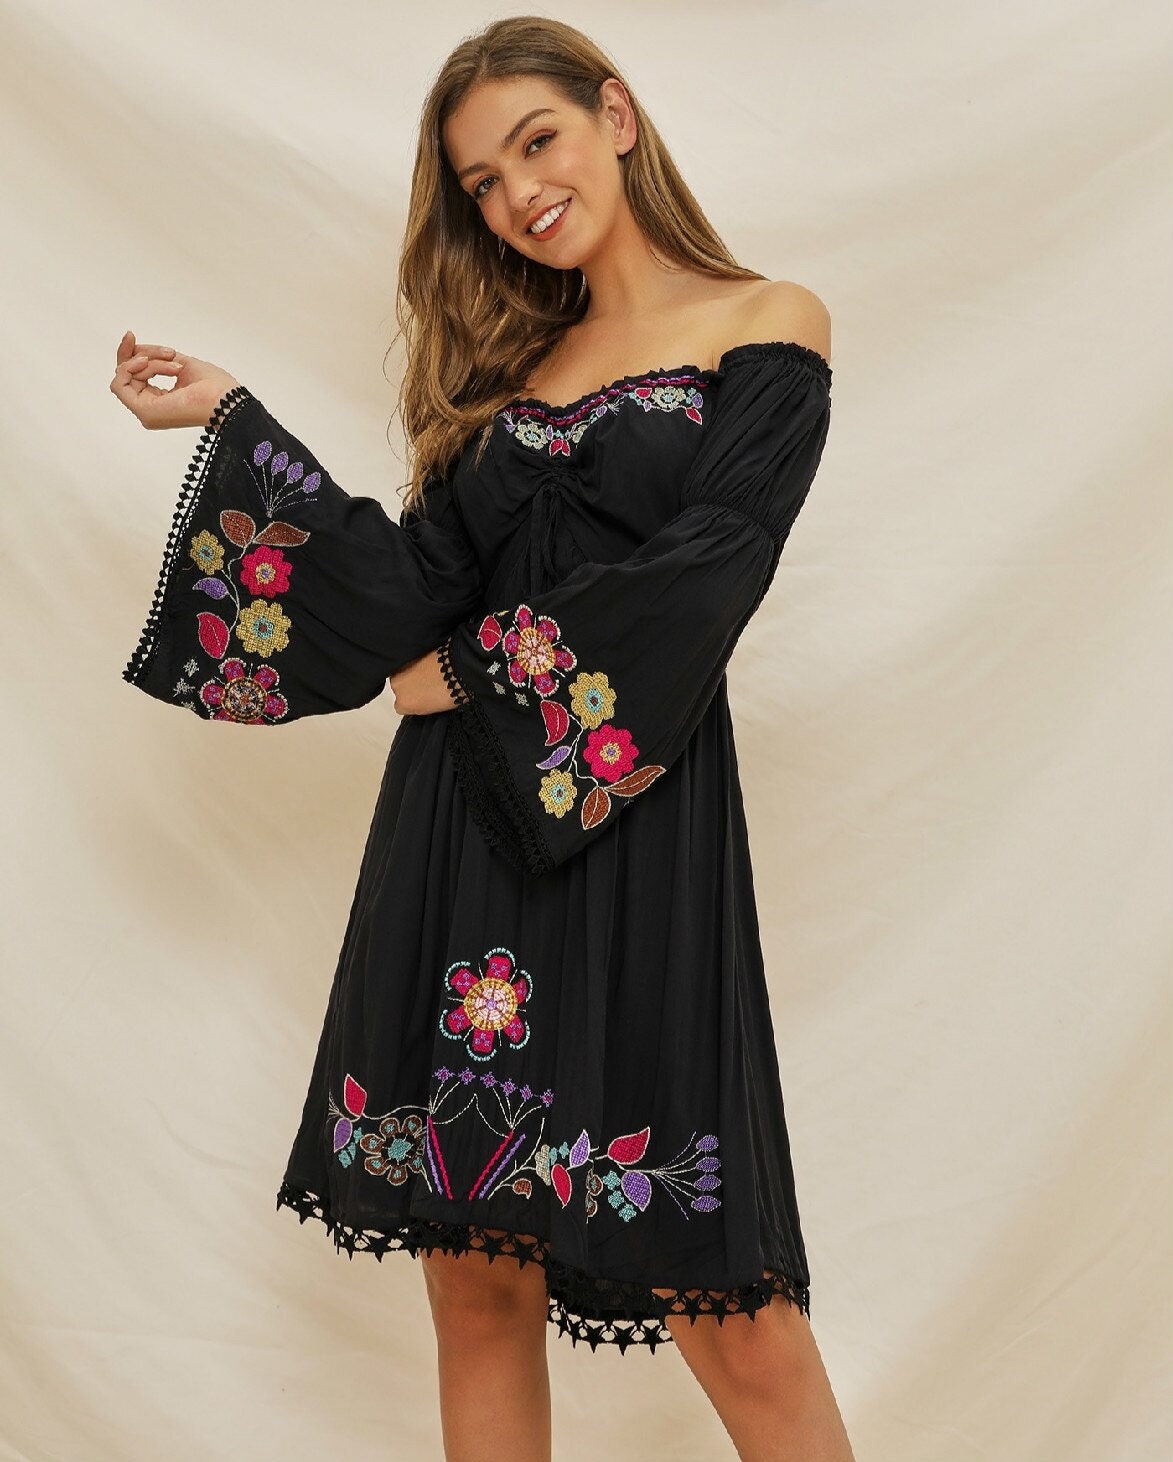 Floral Print Floral Chiffon Maxi Dress For Plus Size Women Chiffon, Full  Sleeve, Loose Fit, Perfect For Summer Concerts, Holidays, And Beach Days  From Fedoradie, $30.94 | DHgate.Com